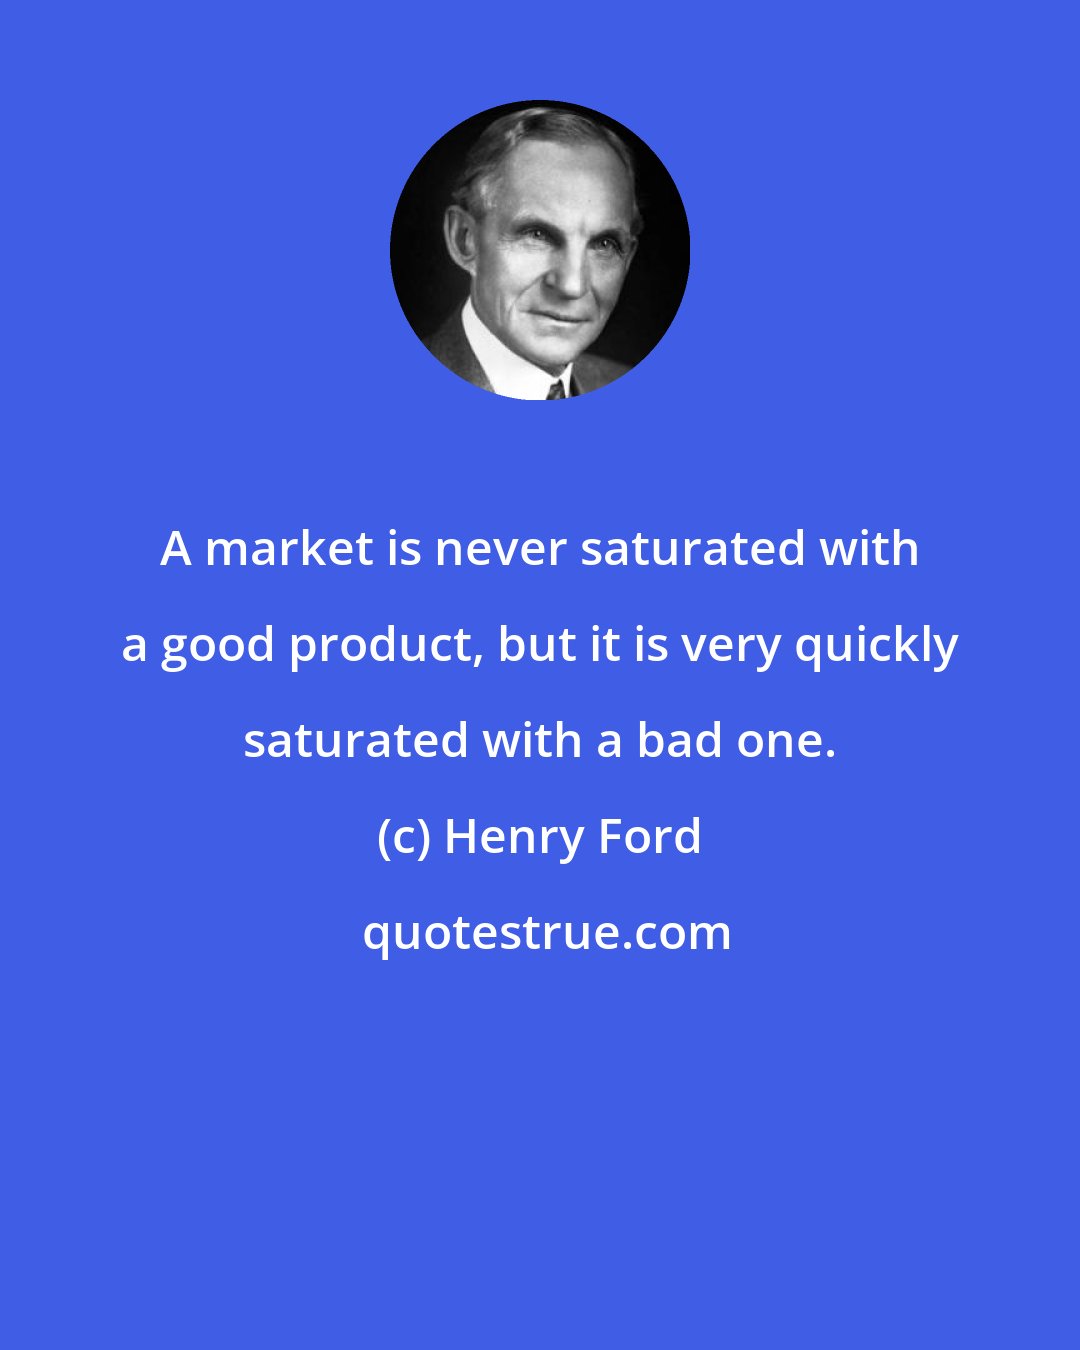 Henry Ford: A market is never saturated with a good product, but it is very quickly saturated with a bad one.